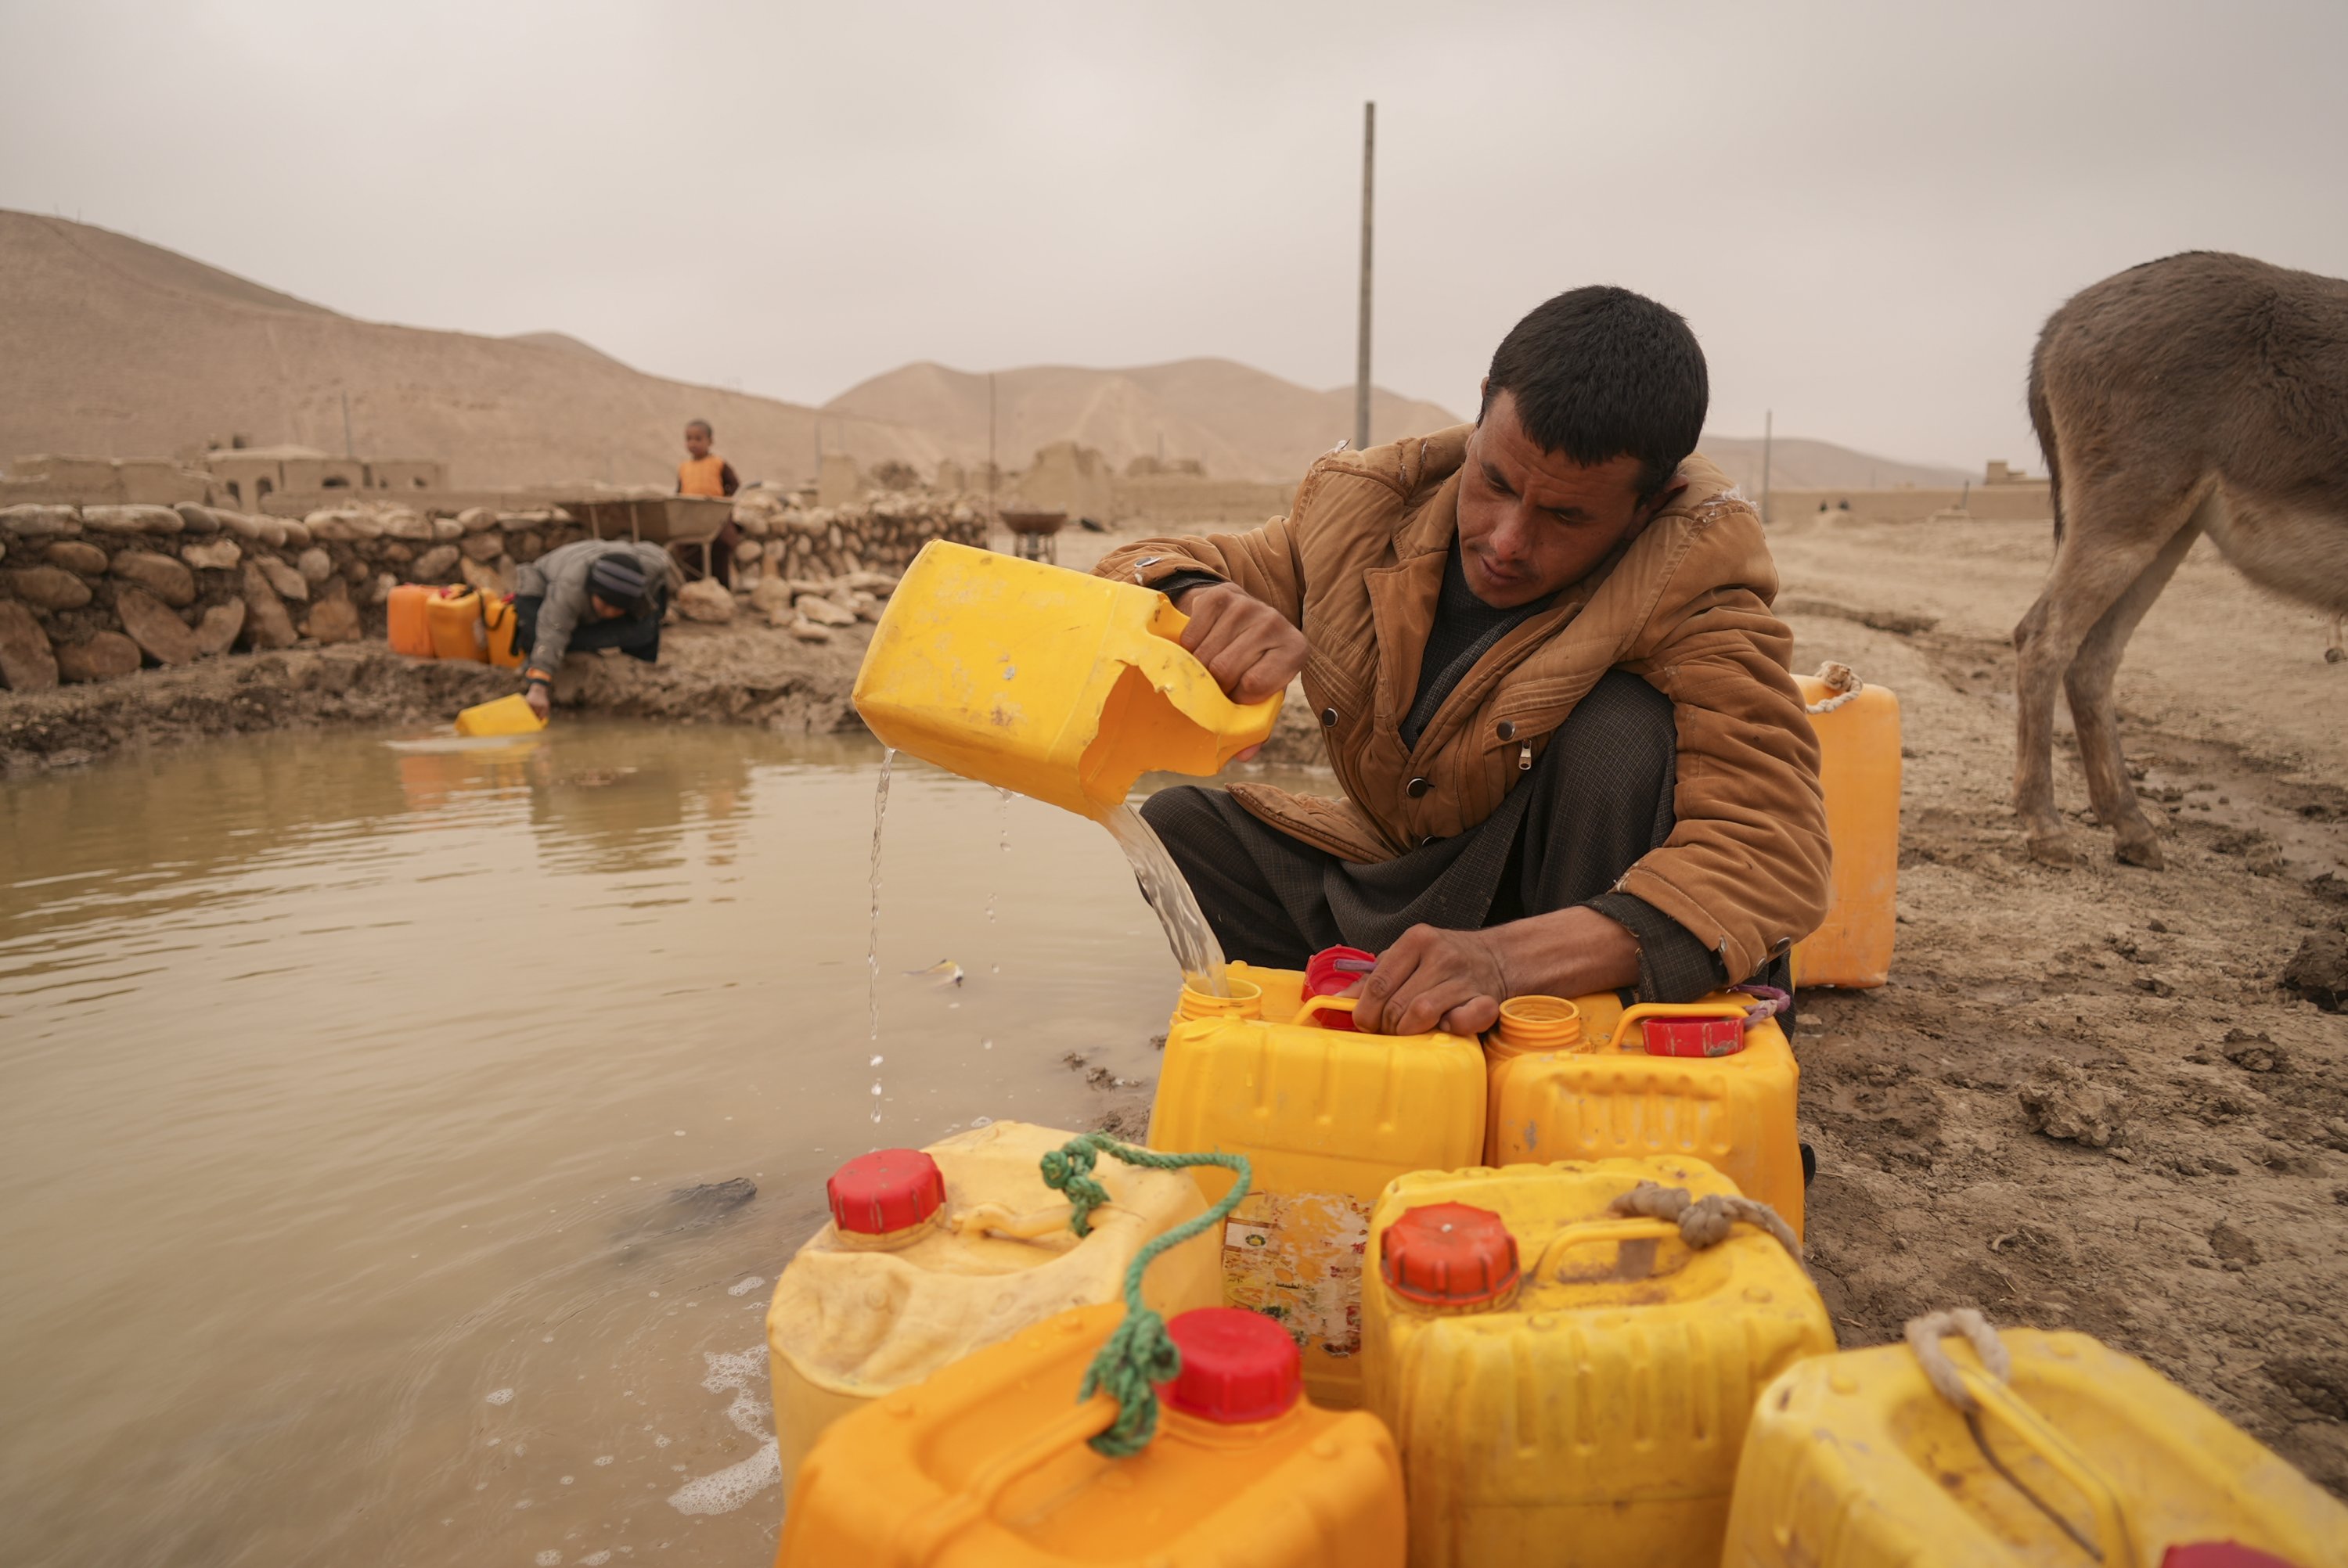 Afghan man fills oil canisters with water near the improvised dam, in Hachka, Afghanistan, Dec. 13, 2021. (AP Photo)